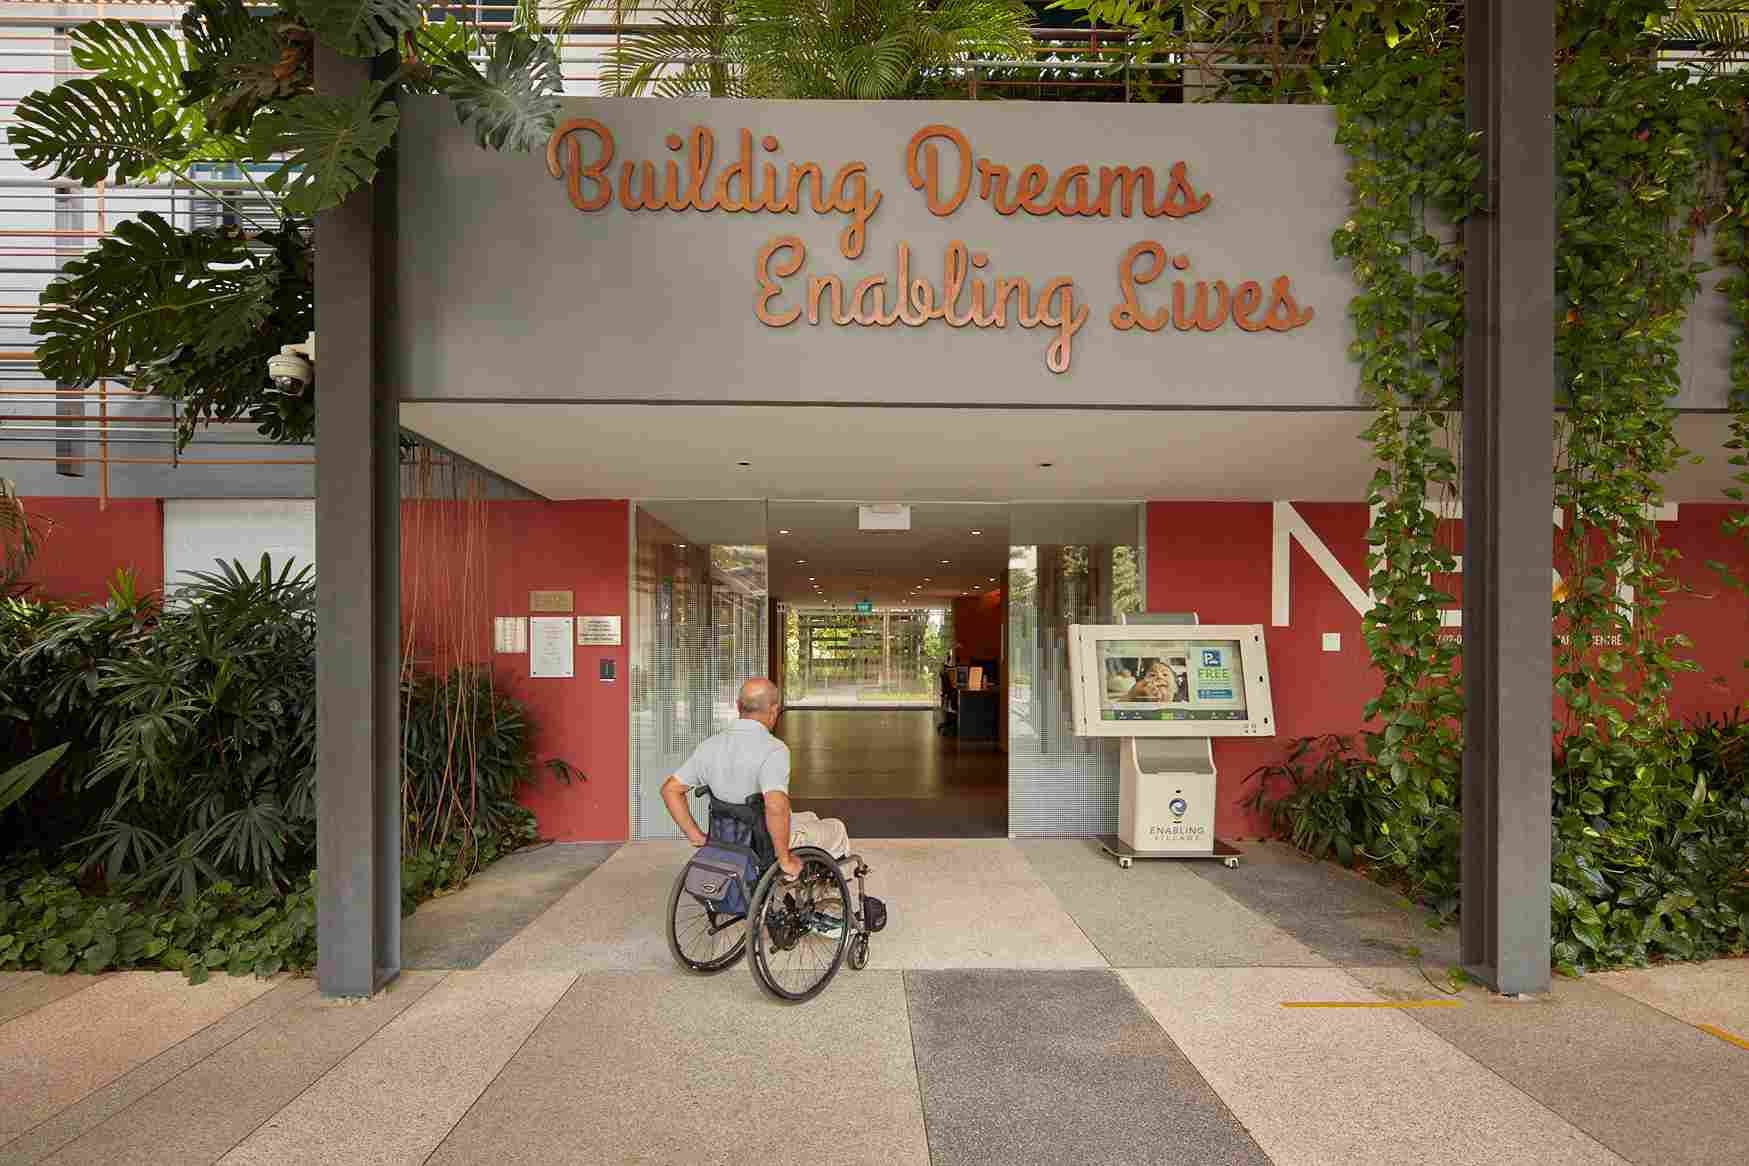 Singapore's Enabling Village provides education, employment and more for people with disabilities.  is an inclusive space to find.